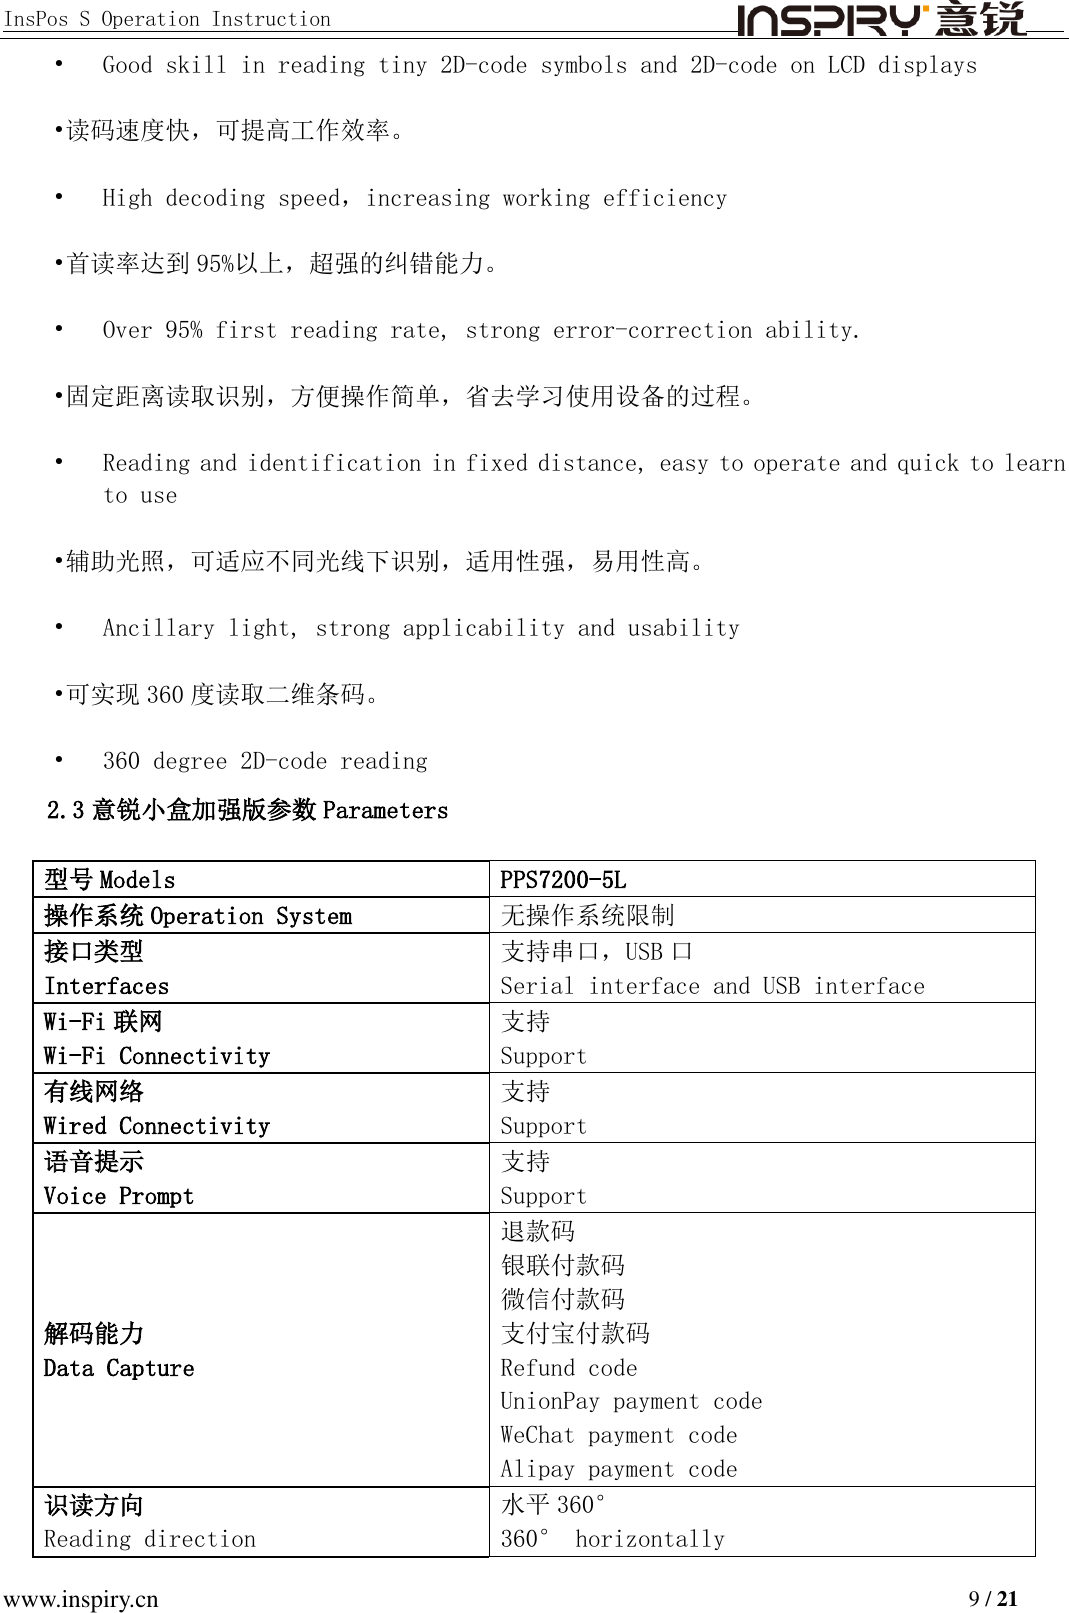 InsPos S Operation Instruction                                         www.inspiry.cn                                                                           9 / 21 • Good skill in reading tiny 2D-code symbols and 2D-code on LCD displays •读码速度快，可提高工作效率。 • High decoding speed，increasing working efficiency  •首读率达到 95%以上，超强的纠错能力。 • Over 95% first reading rate, strong error-correction ability.  •固定距离读取识别，方便操作简单，省去学习使用设备的过程。 • Reading and identification in fixed distance, easy to operate and quick to learn to use •辅助光照，可适应不同光线下识别，适用性强，易用性高。 • Ancillary light, strong applicability and usability •可实现 360 度读取二维条码。 • 360 degree 2D-code reading 2.3 意锐小盒加强版参数 Parameters 型号 Models PPS7200-5L 操作系统 Operation System 无操作系统限制 接口类型 Interfaces 支持串口，USB 口 Serial interface and USB interface Wi-Fi 联网 Wi-Fi Connectivity 支持 Support 有线网络 Wired Connectivity 支持 Support 语音提示 Voice Prompt 支持  Support 解码能力 Data Capture 退款码 银联付款码 微信付款码 支付宝付款码 Refund code UnionPay payment code WeChat payment code Alipay payment code 识读方向 Reading direction 水平 360° 360° horizontally 